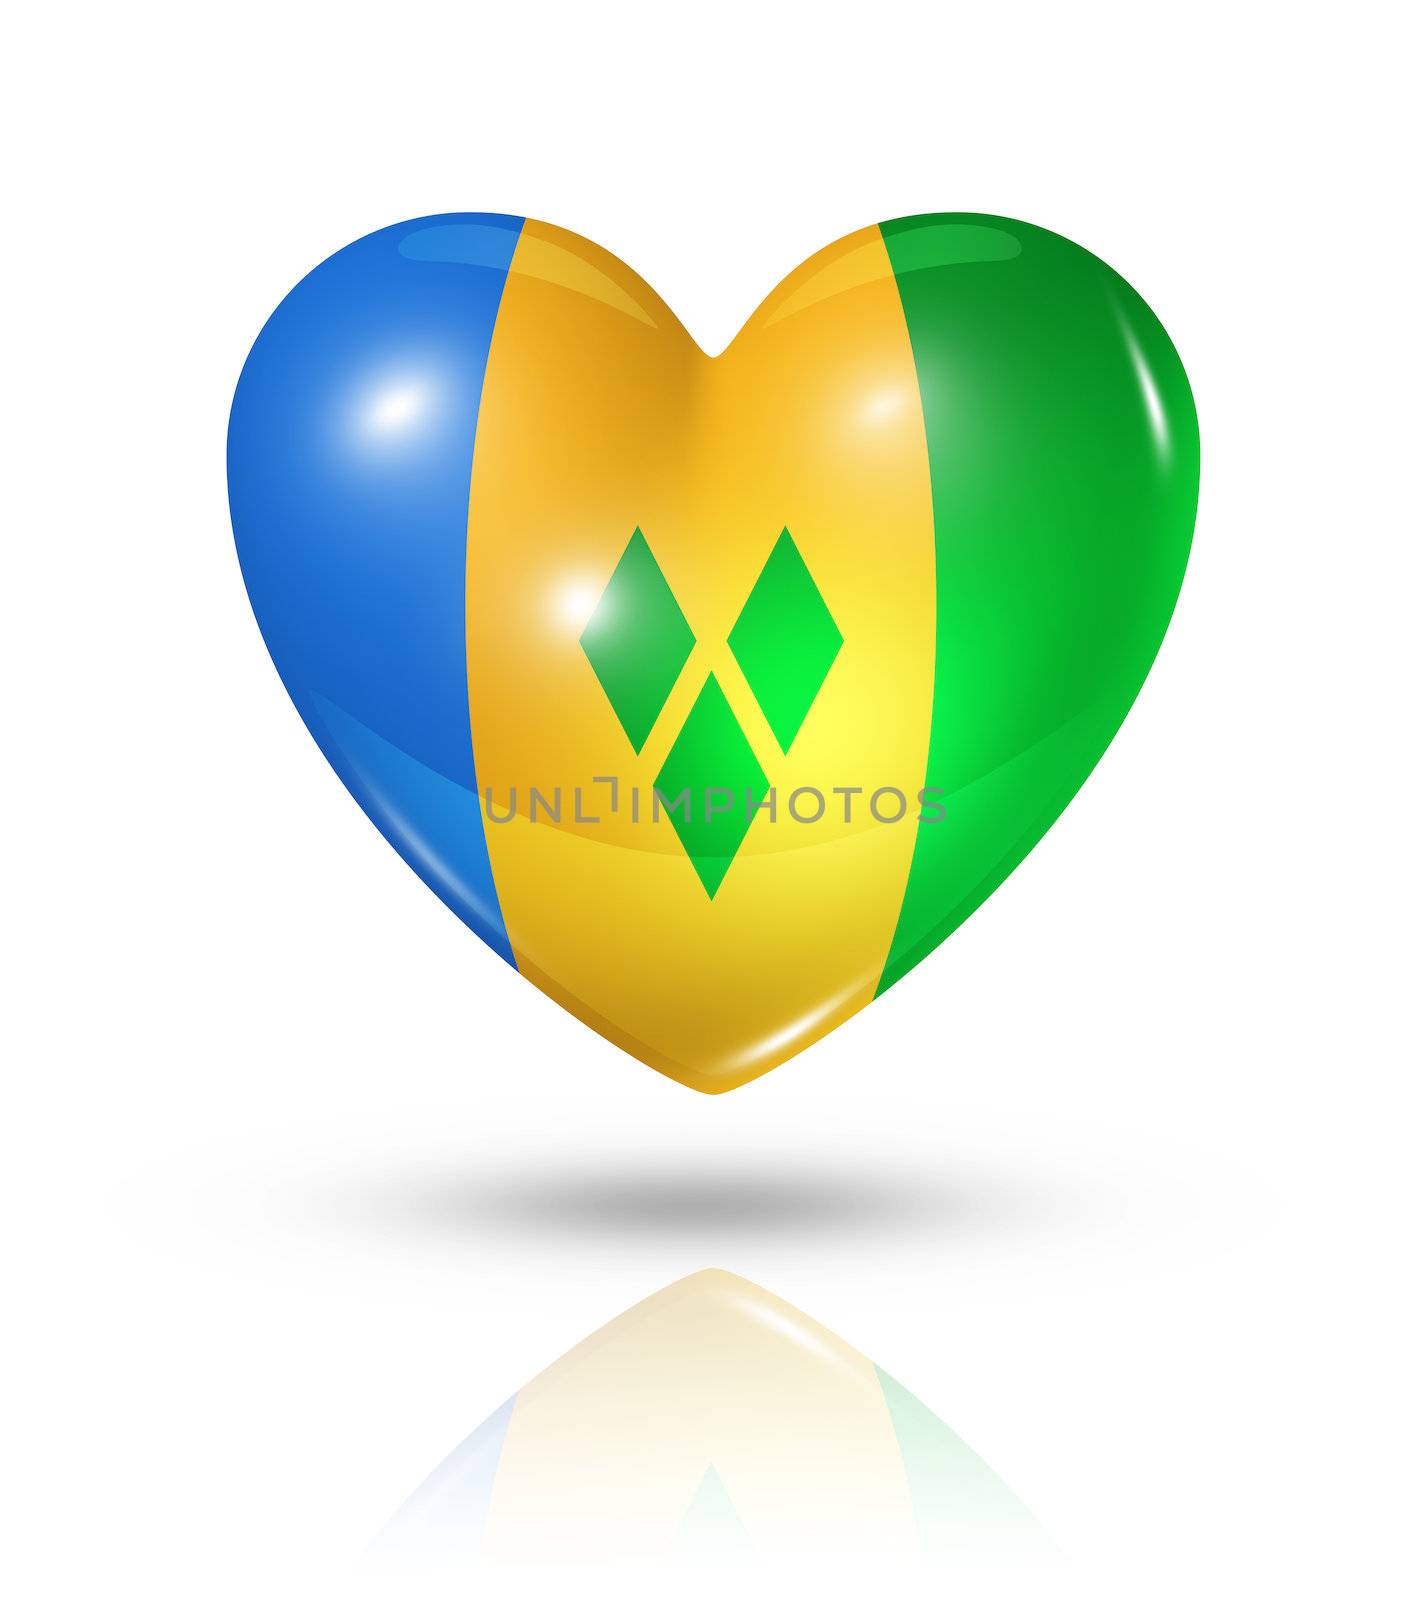 Love Saint Vincent and the Grenadines, heart flag icon by daboost